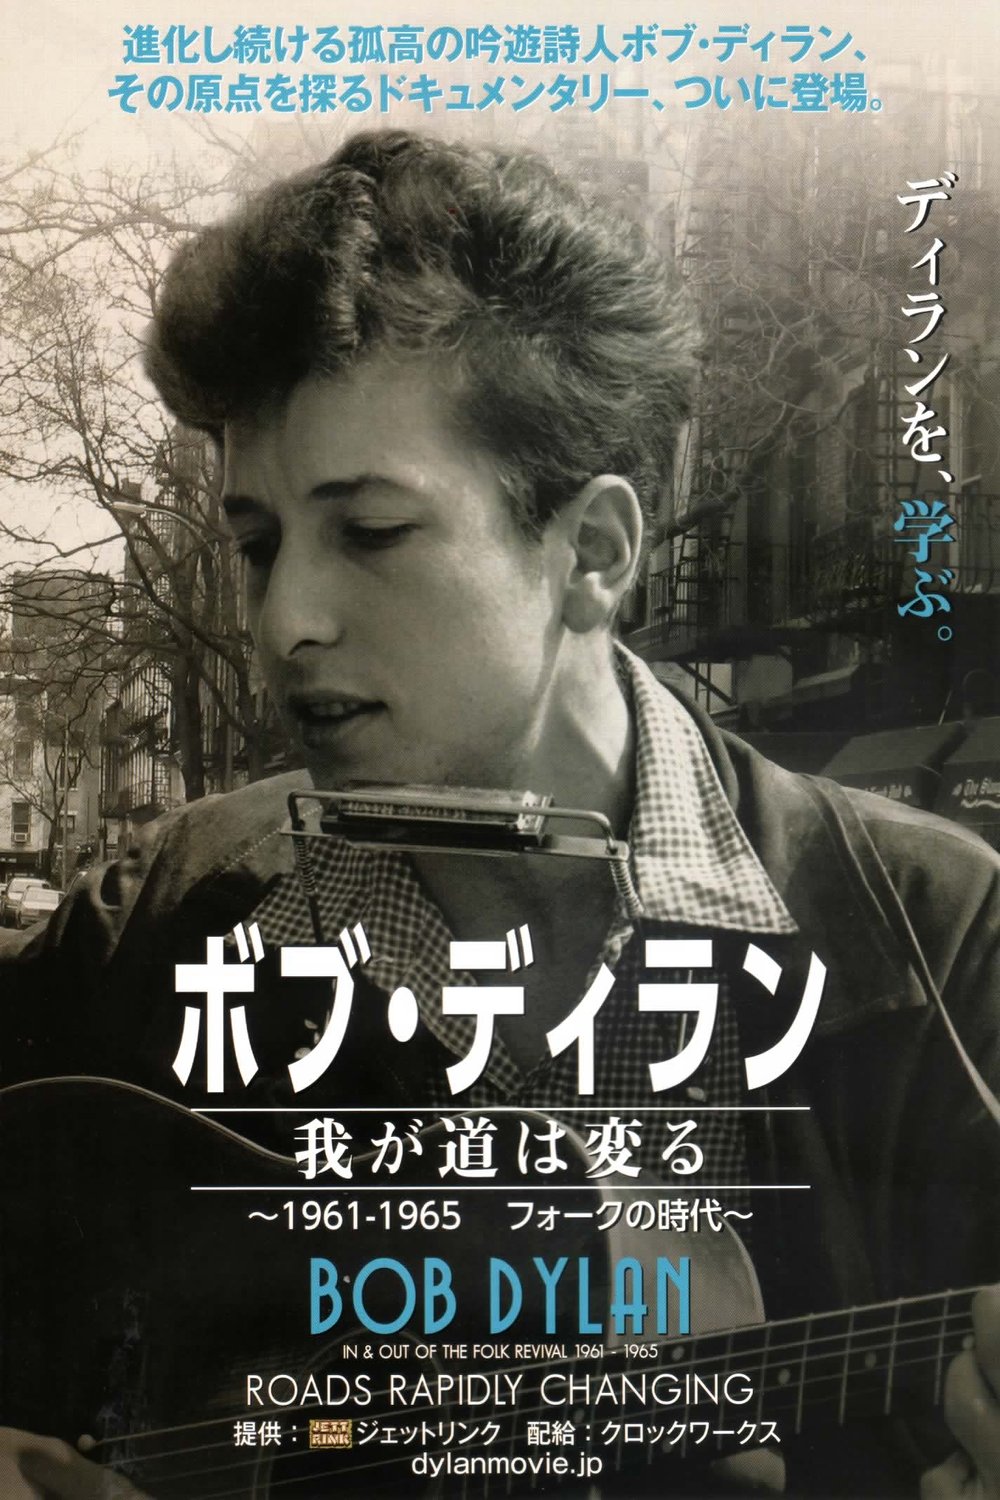 L'affiche du film Bob Dylan: Roads Rapidly Changing - In & Out of the Folk Revival 1961 - 1965